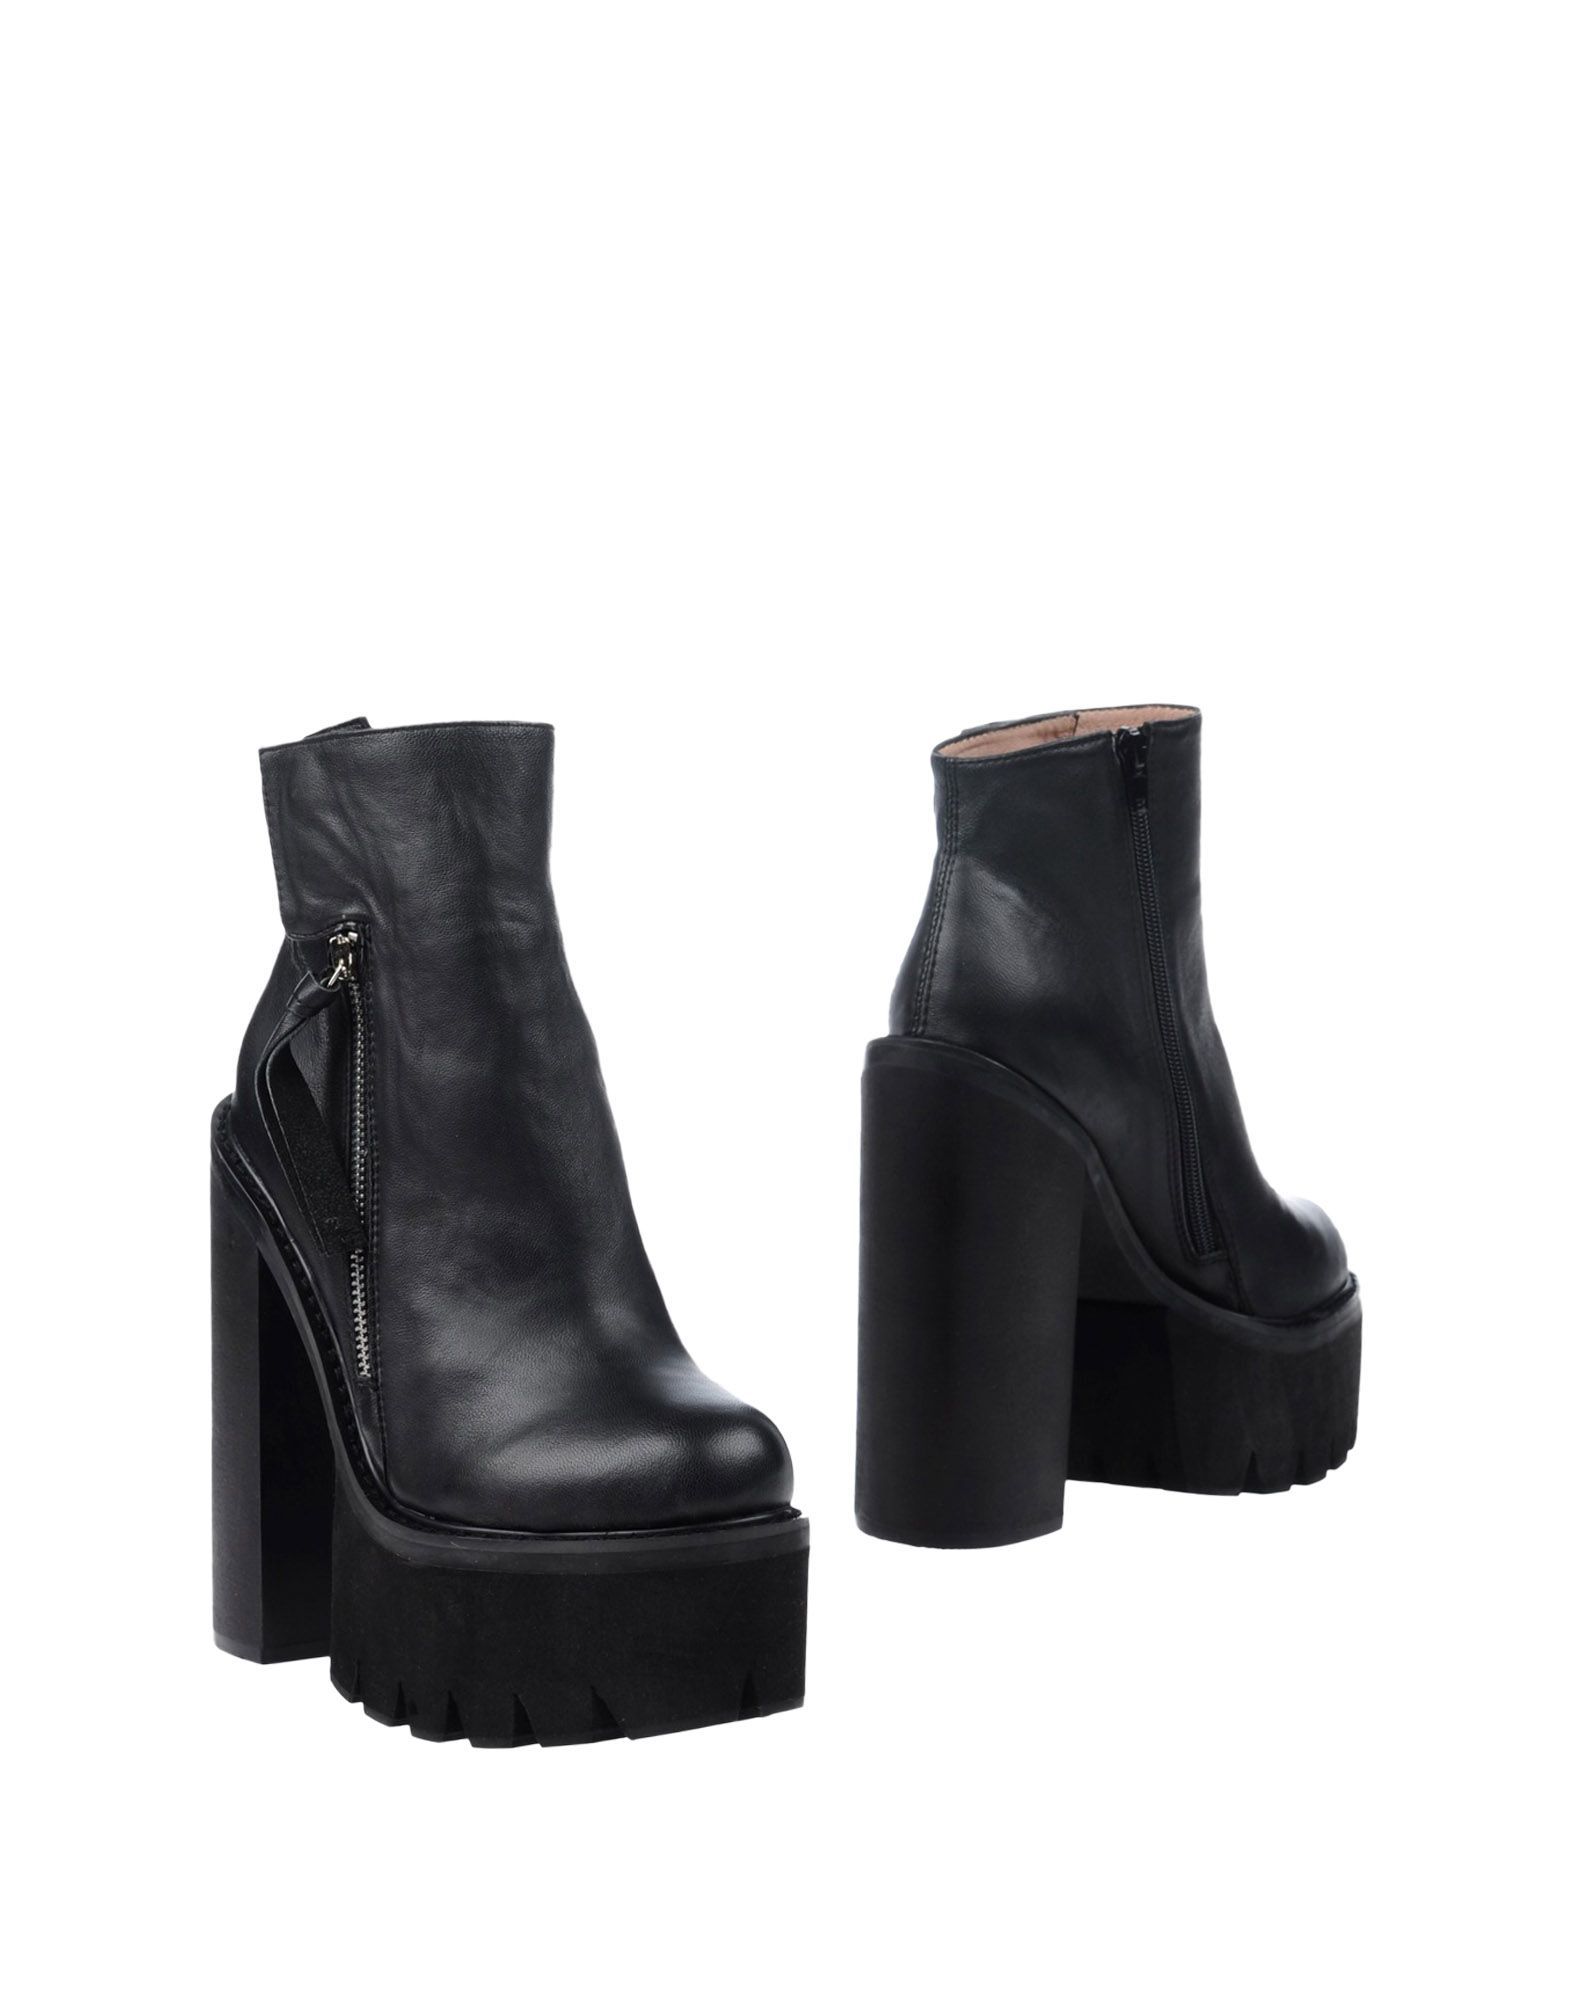 JEFFREY CAMPBELL Ankle boots | YOOX (US)